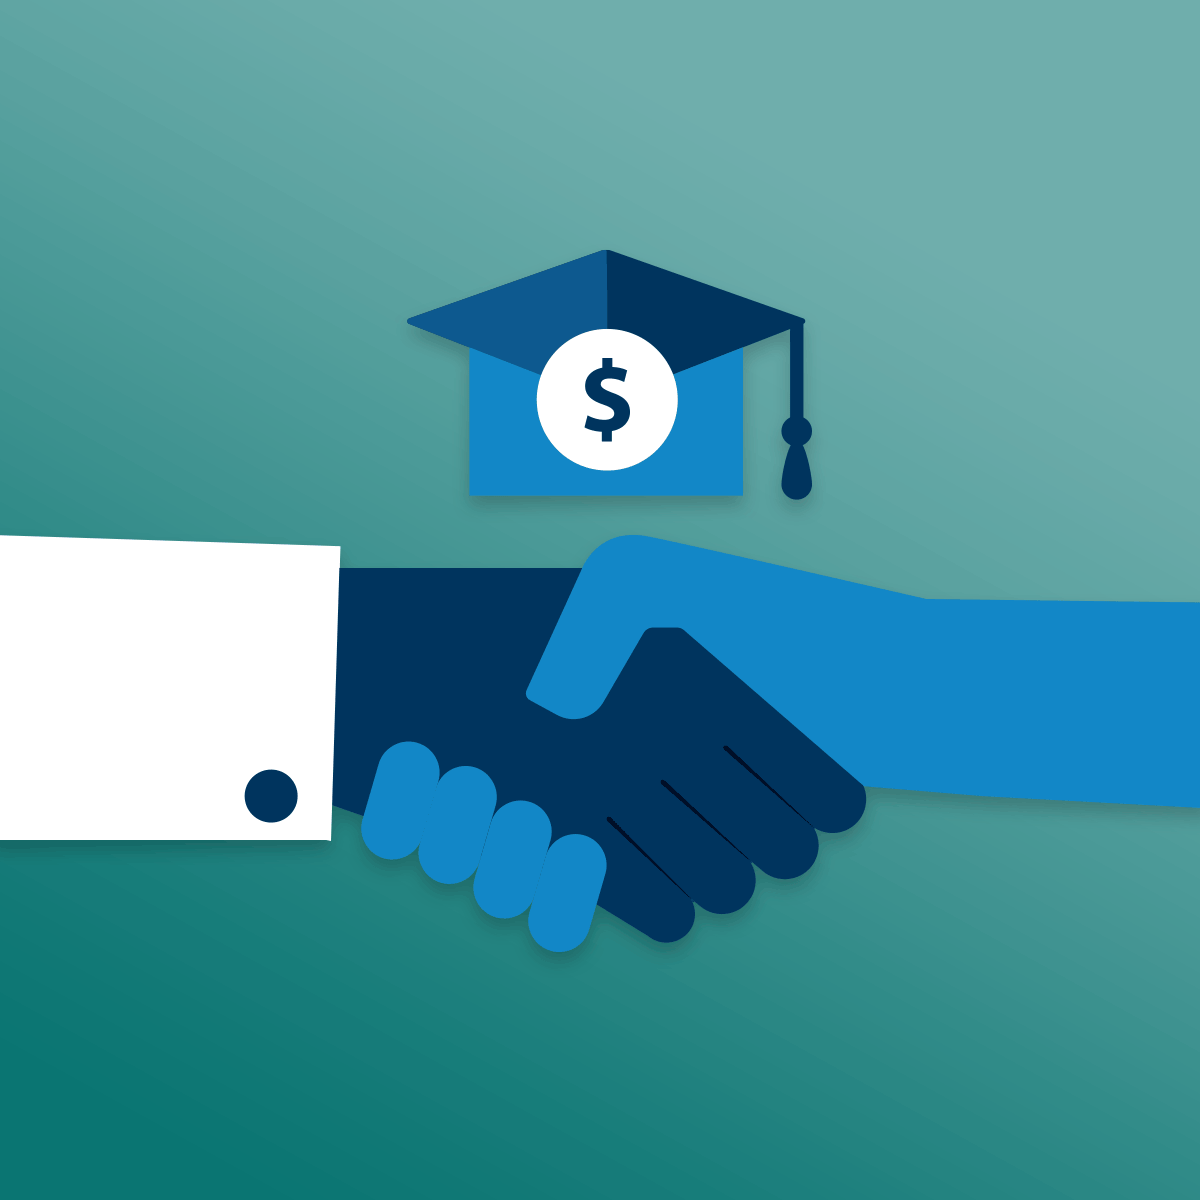 Image of two hands shaking with icon above it of a grad cap with a money sign on it.